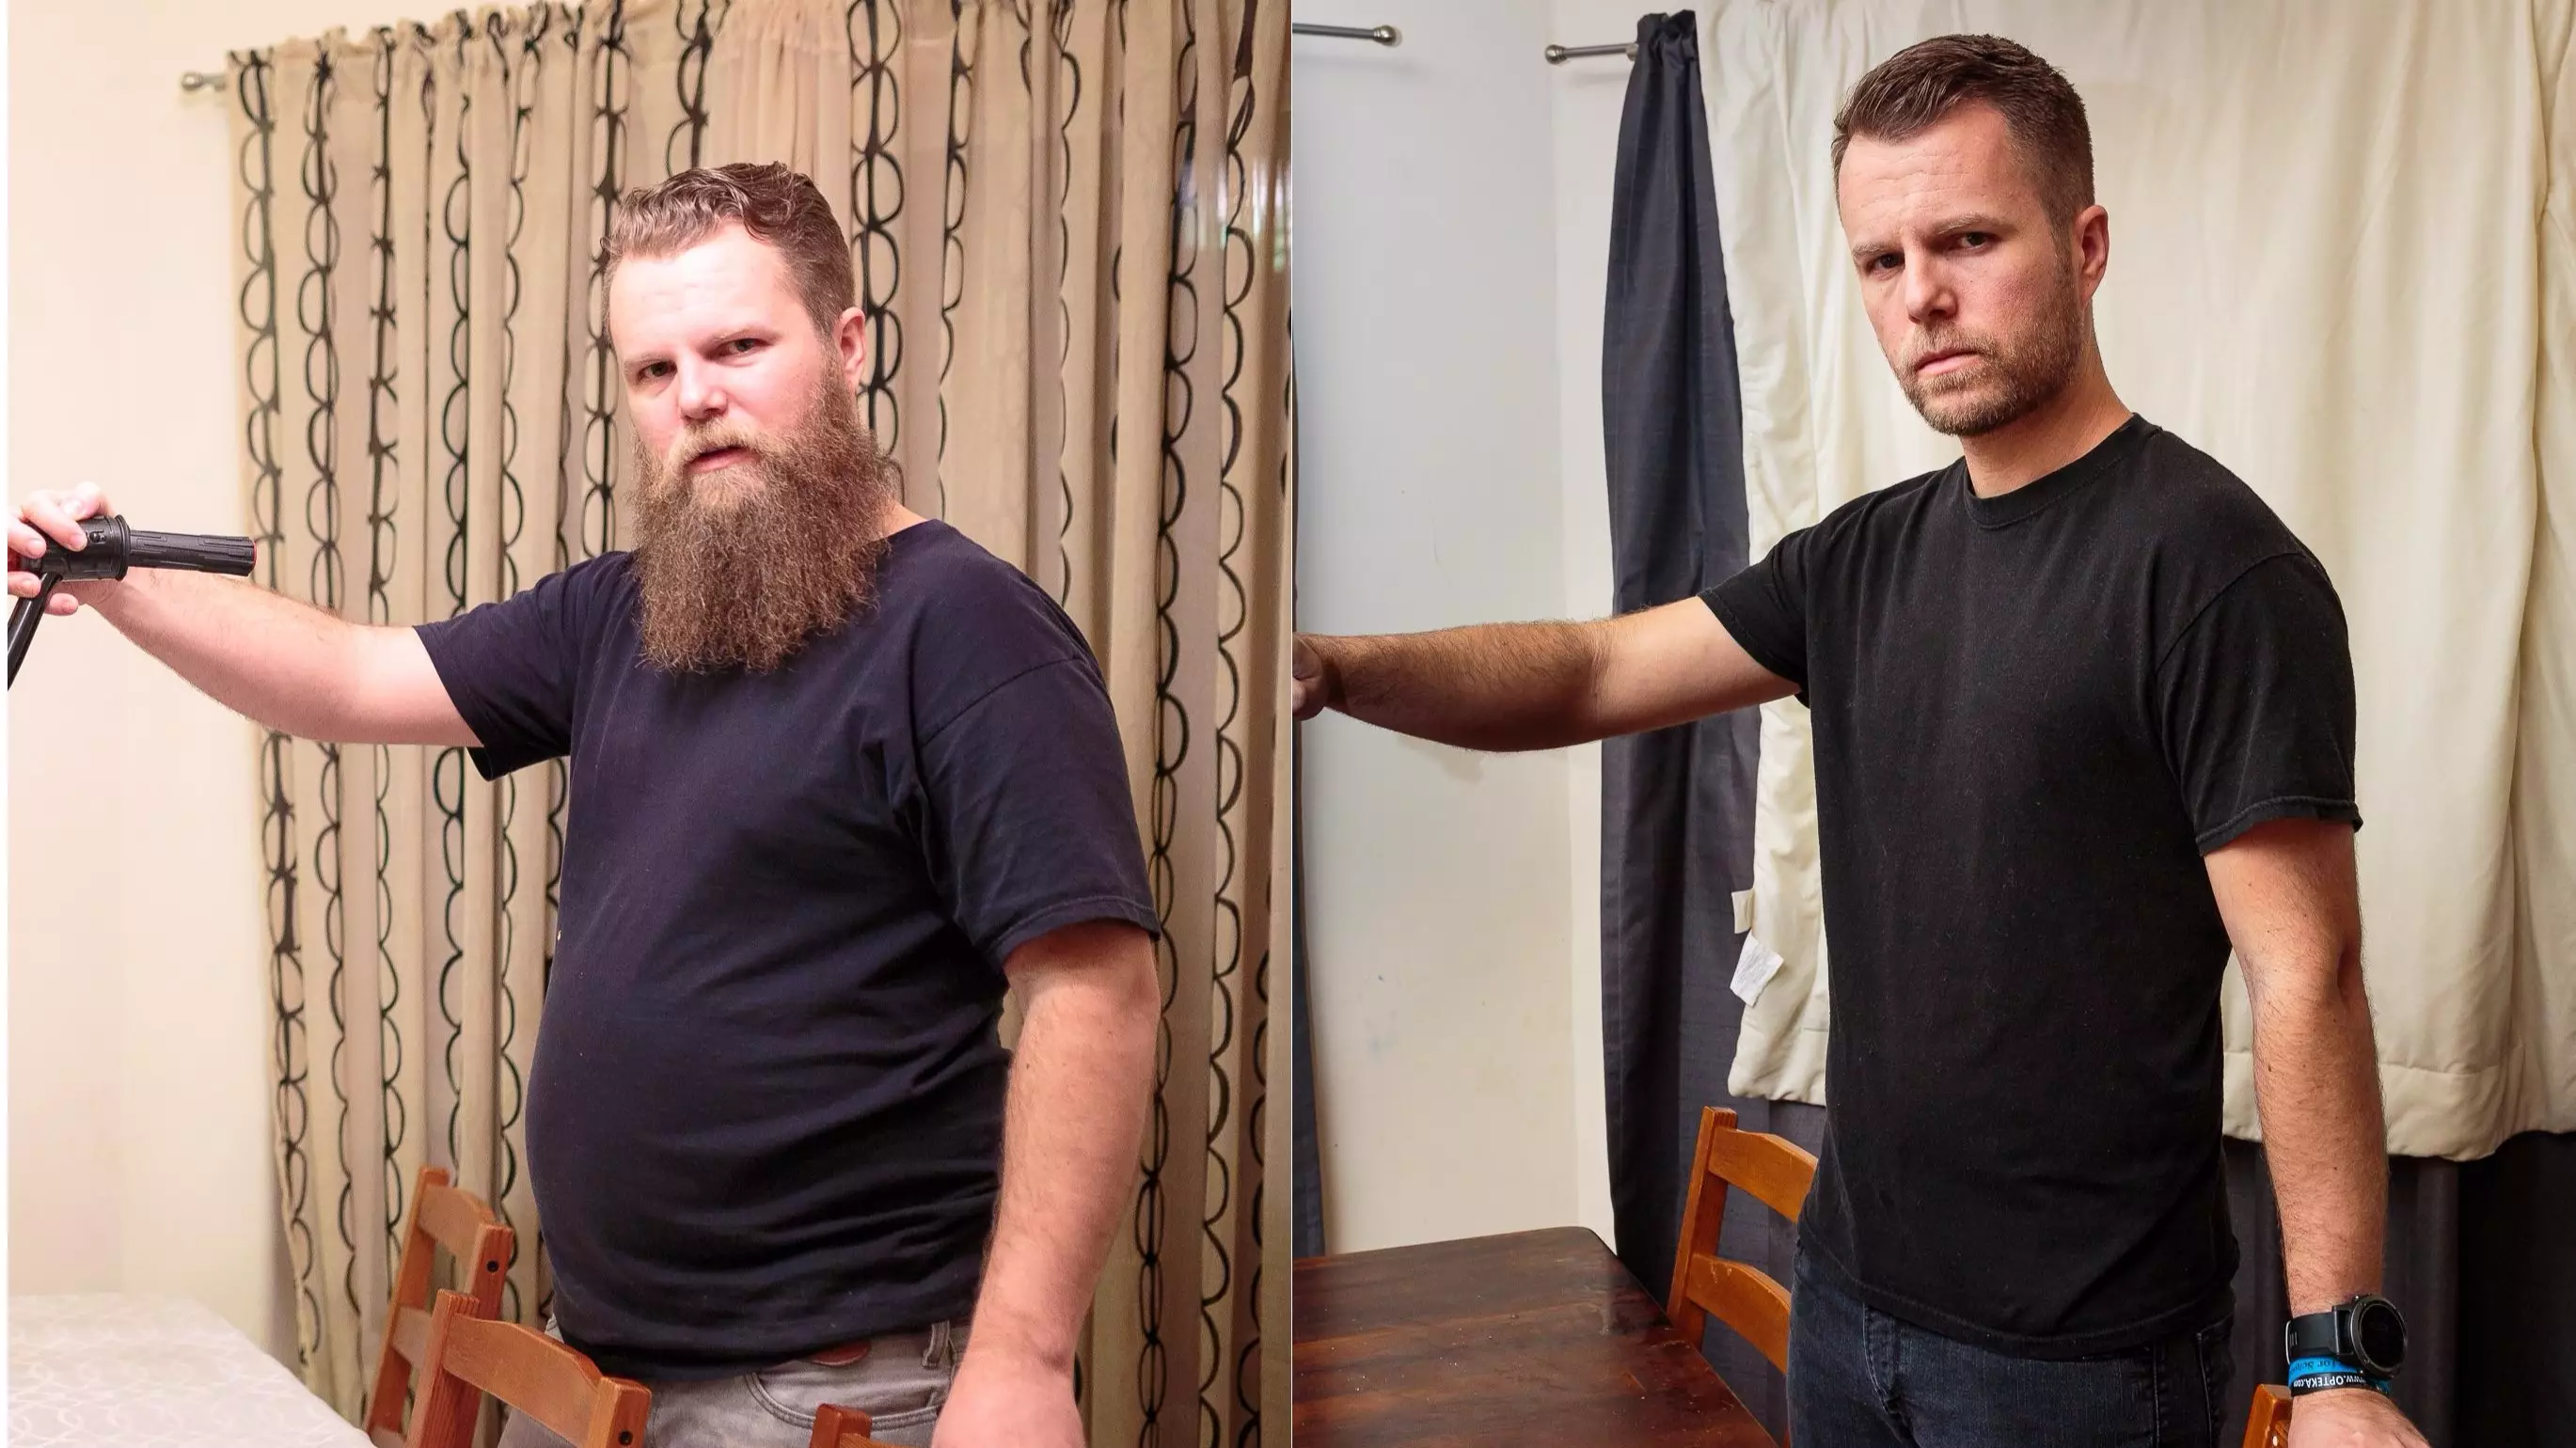 Former Alcoholic Shows His Transformation After Quitting Booze